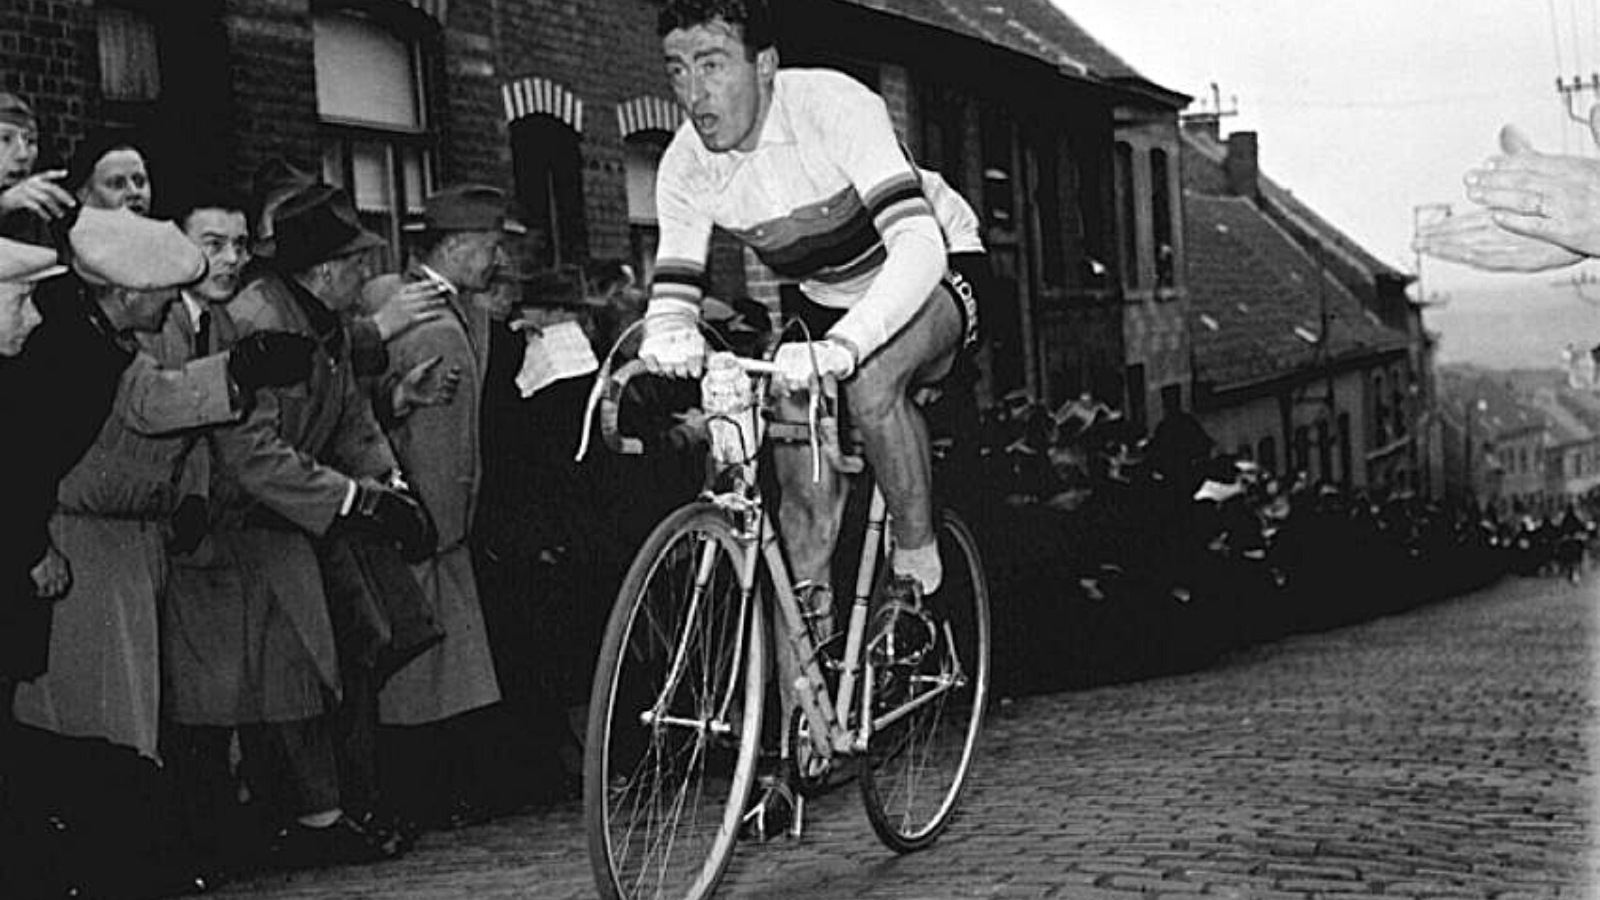 French three-time Tour de France winner and world champion Louison Bobet at the Ronde van Vlaanderen in 1955